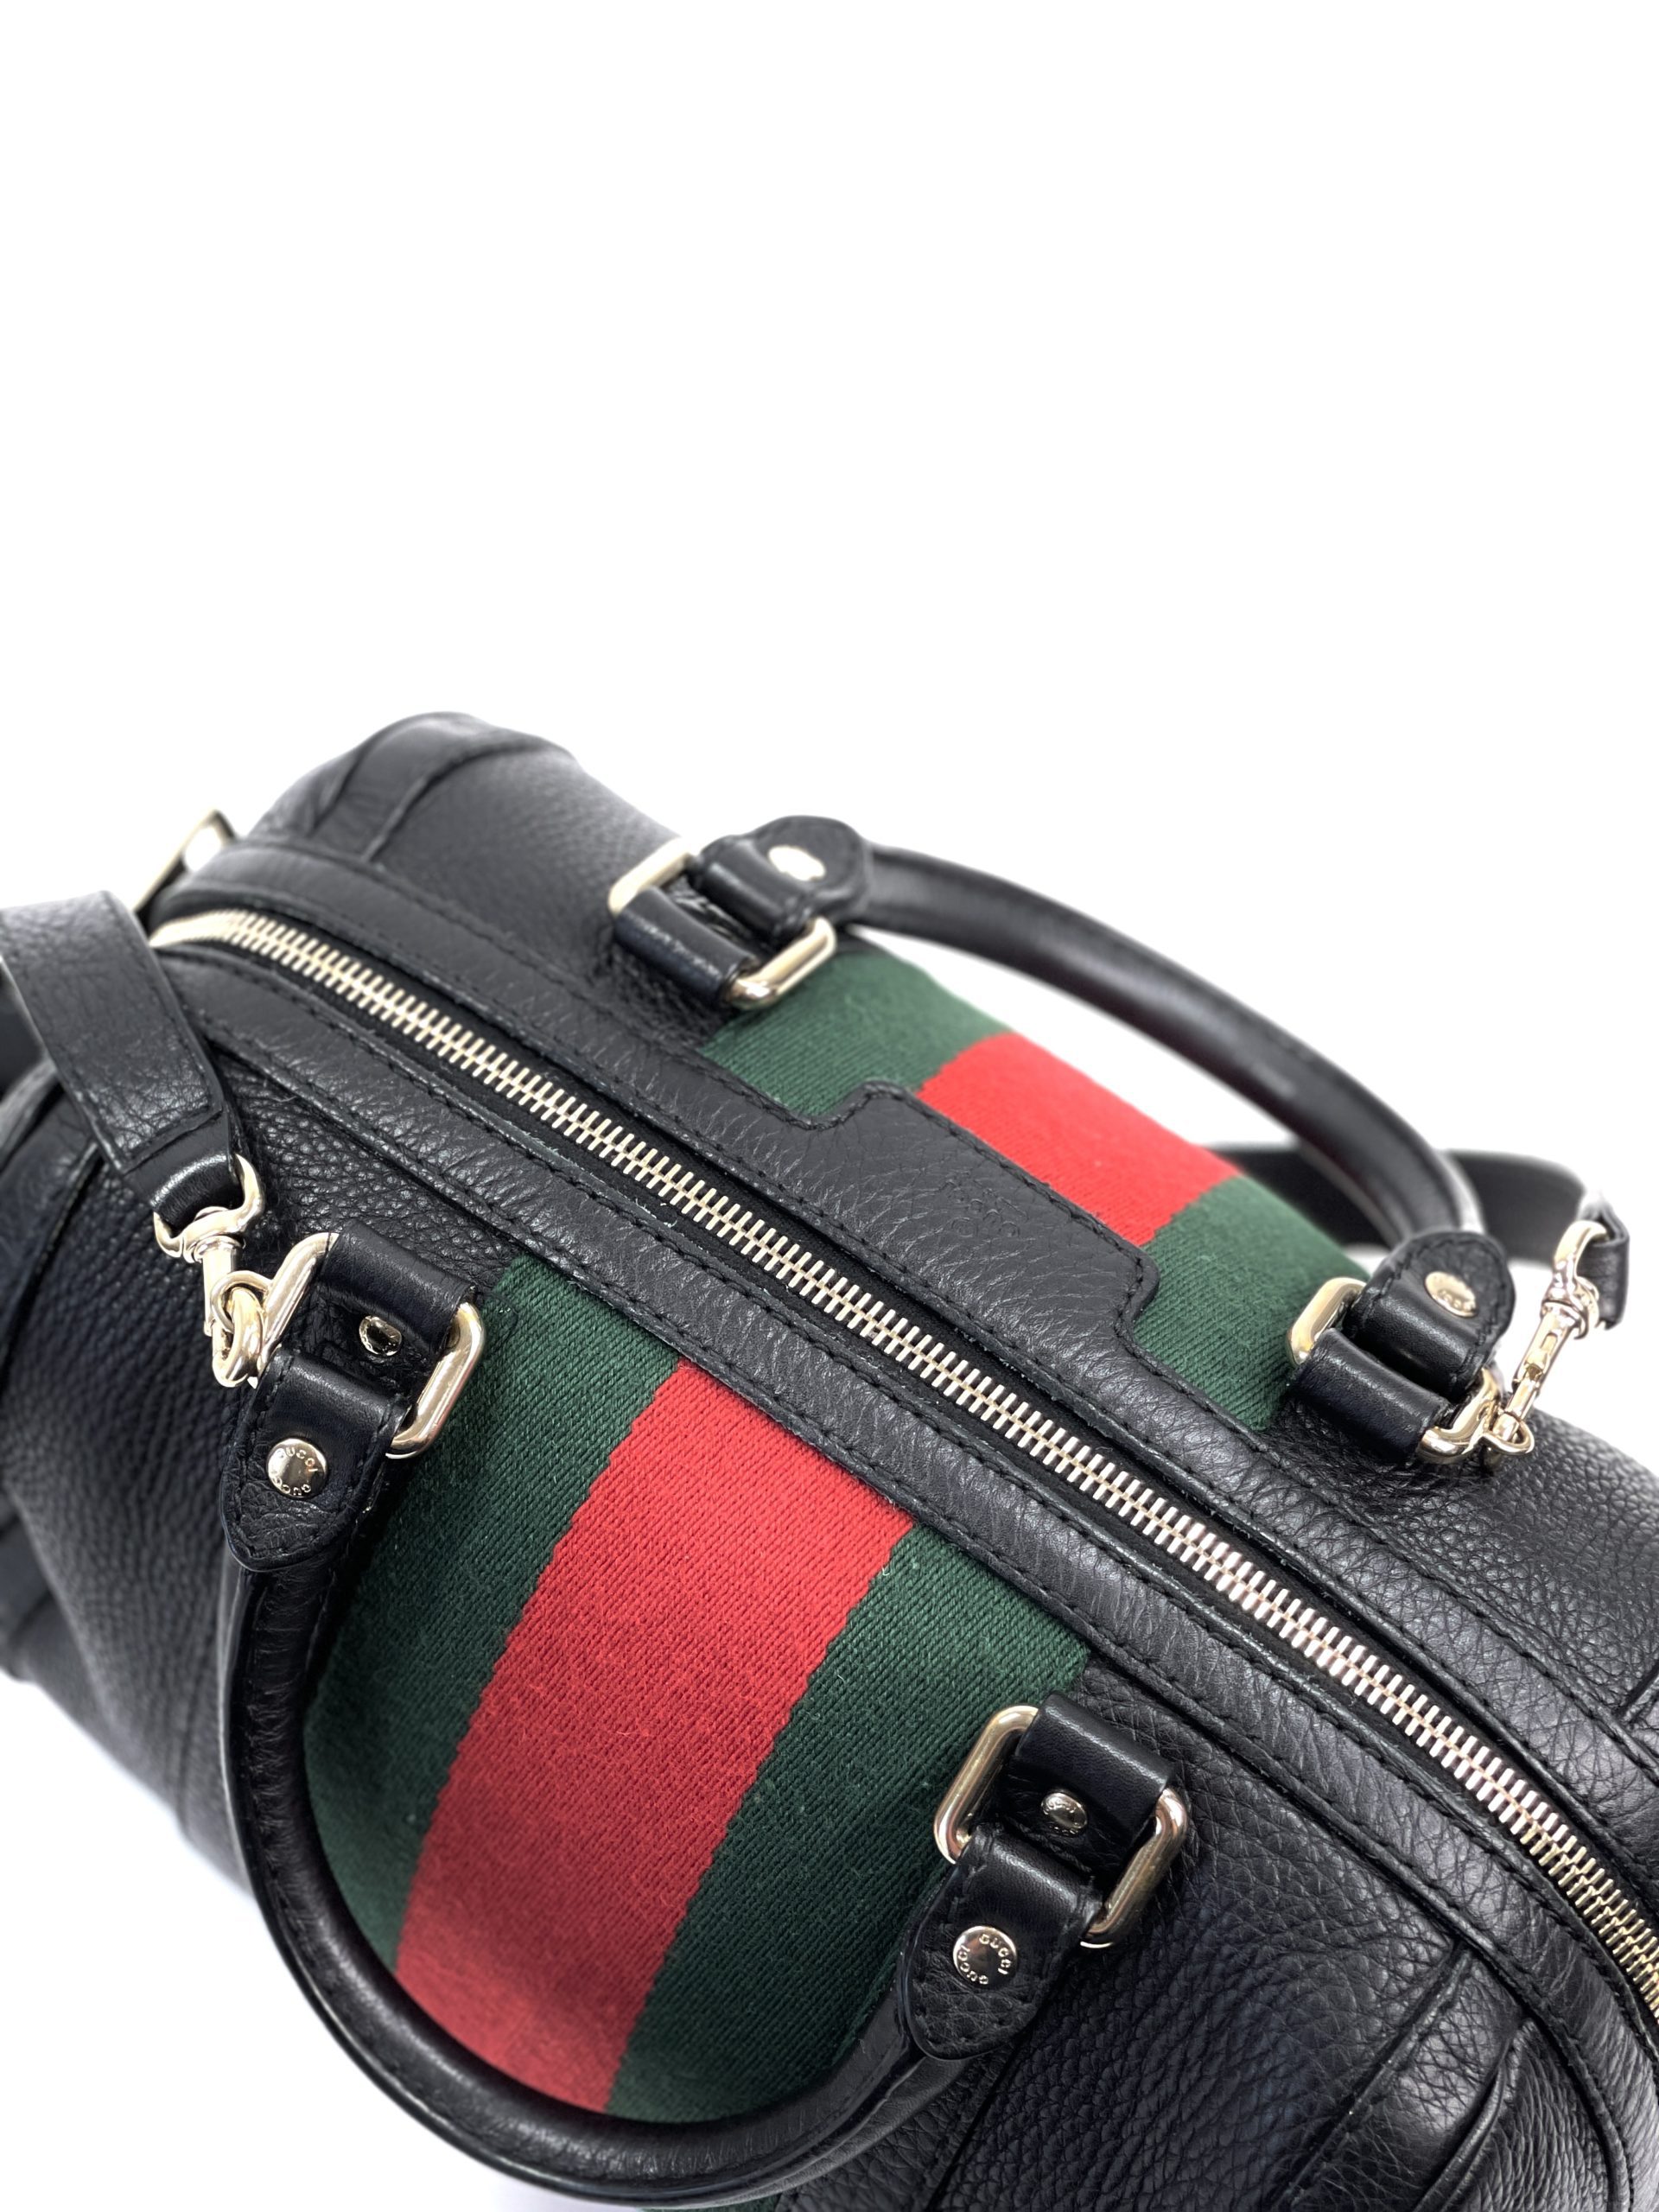 Shop GUCCI Unisex 2WAY Plain Leather Logo Outlet Boston Bags (449649,  449649 BMJ1G, 449649BMJ1G1000, 449649 BMJ1G 1000) by cocoaman